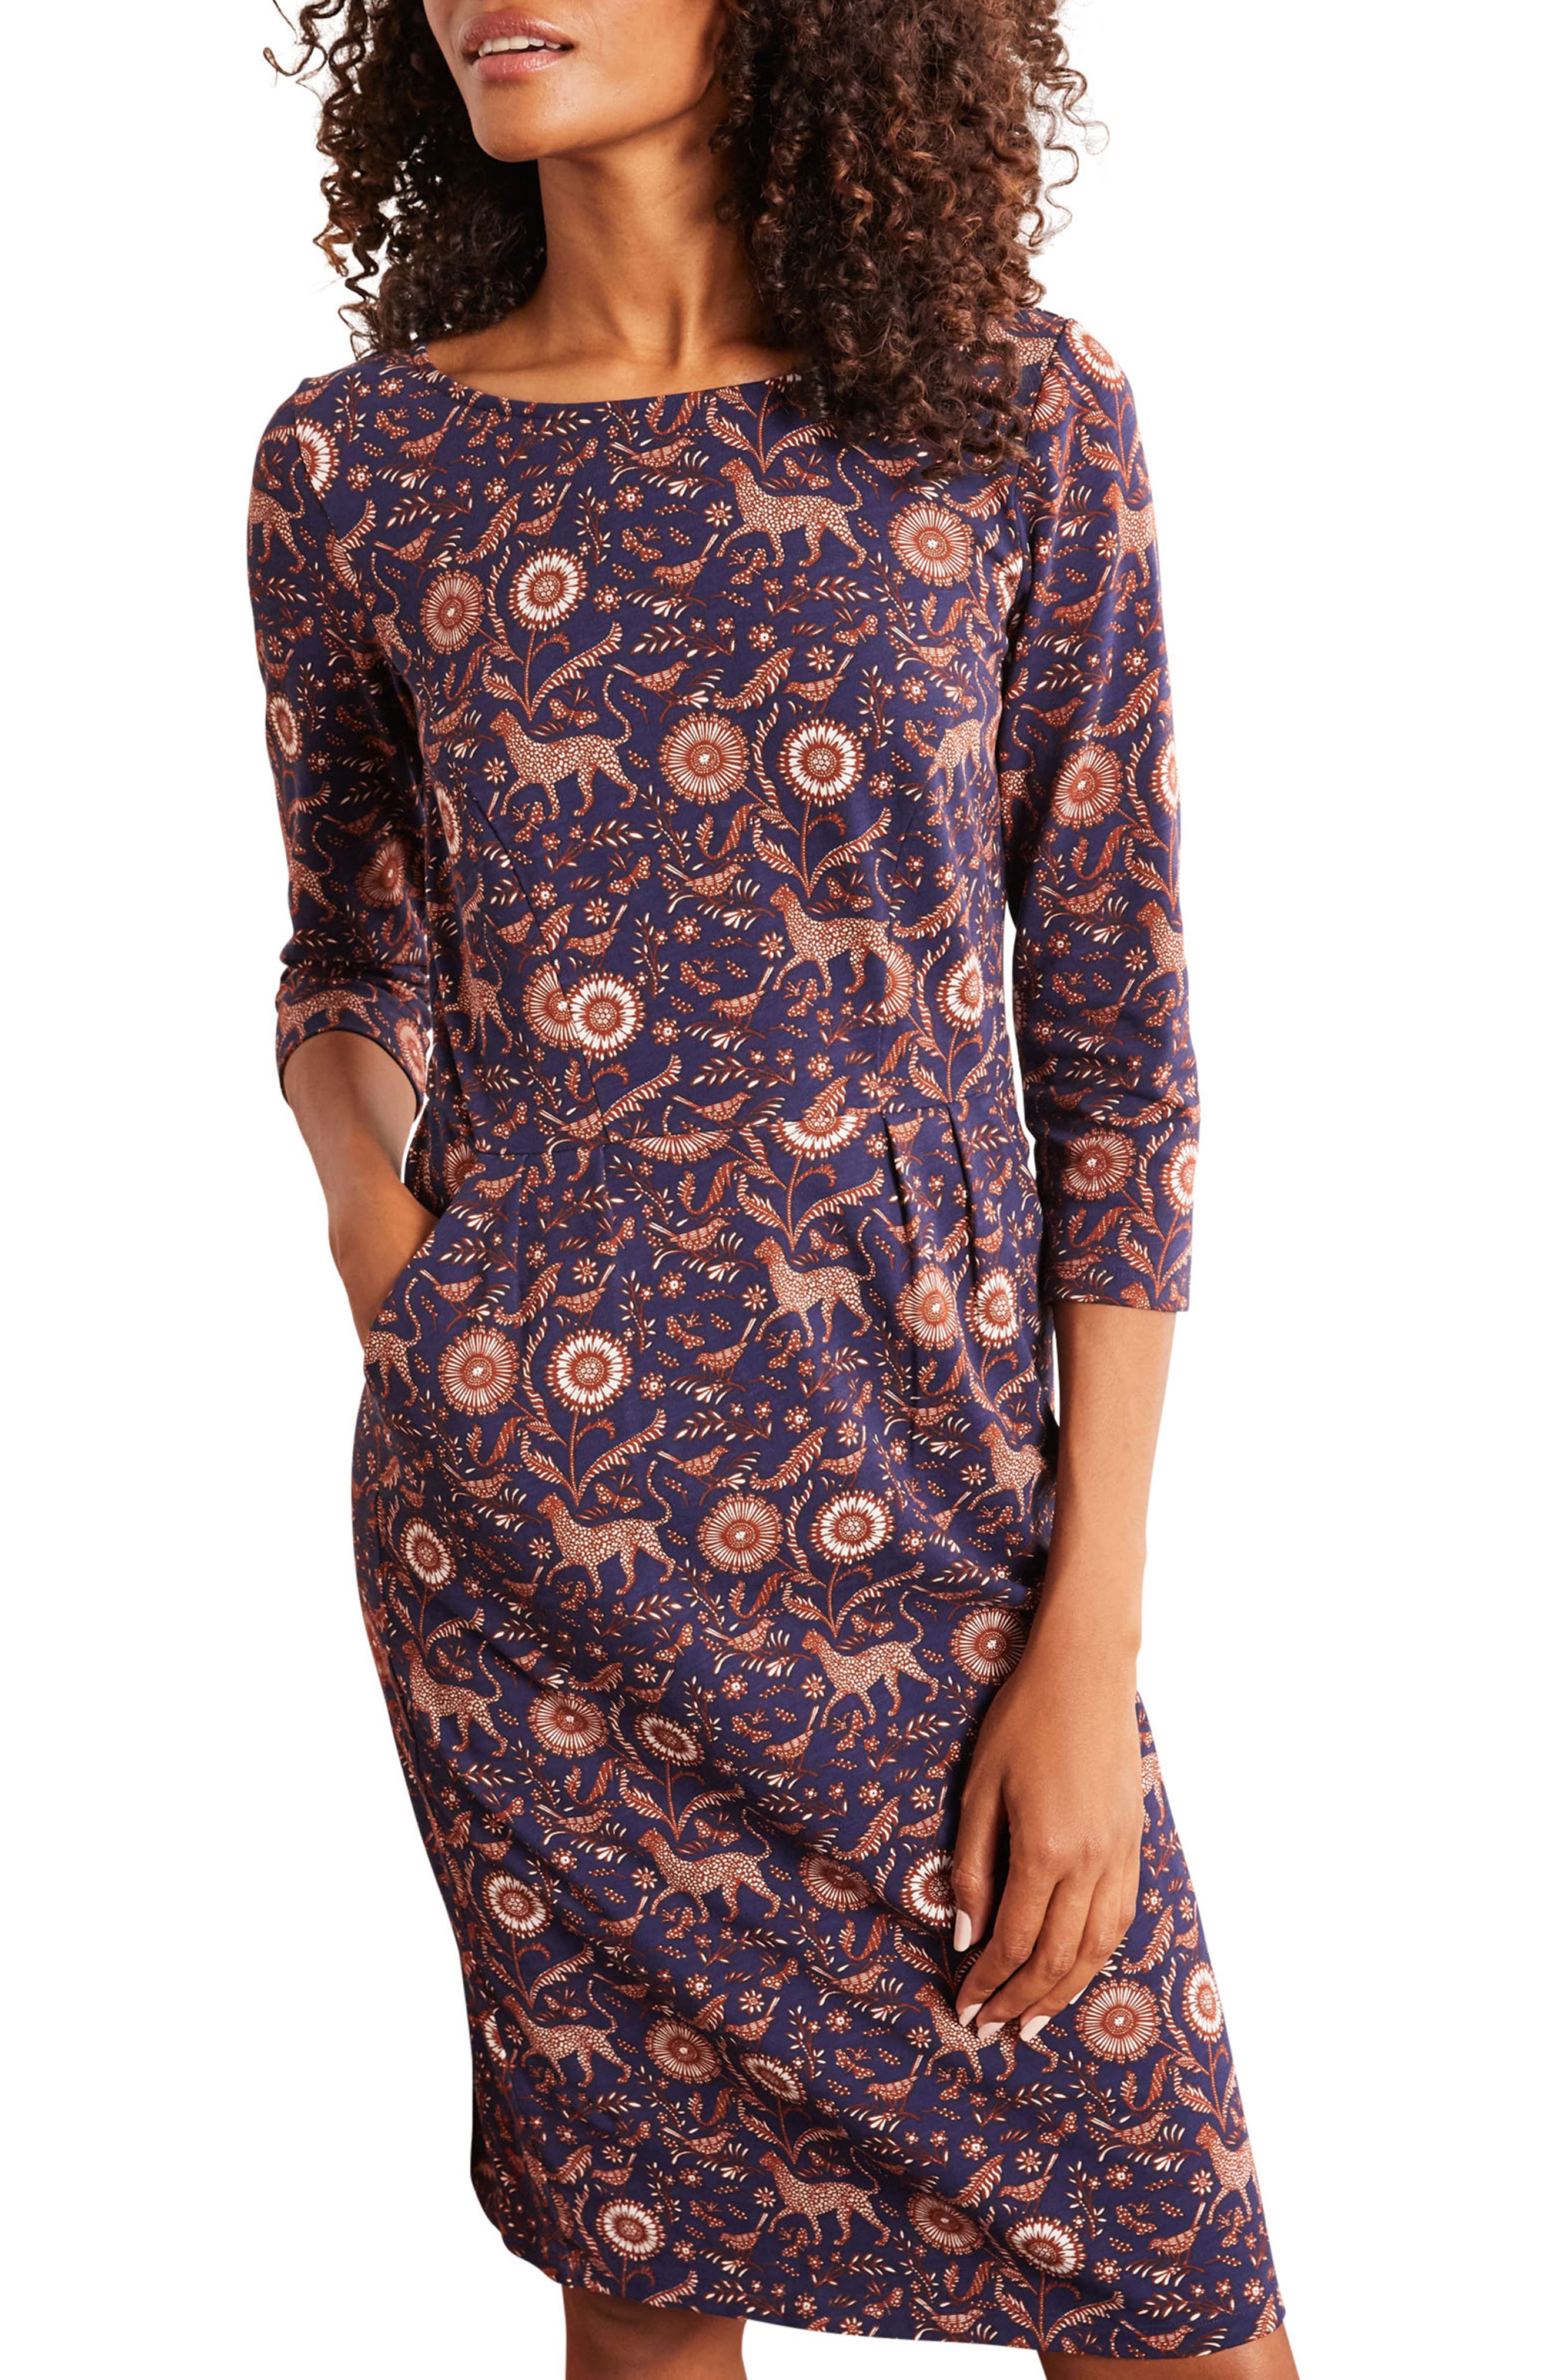 dresses from boden